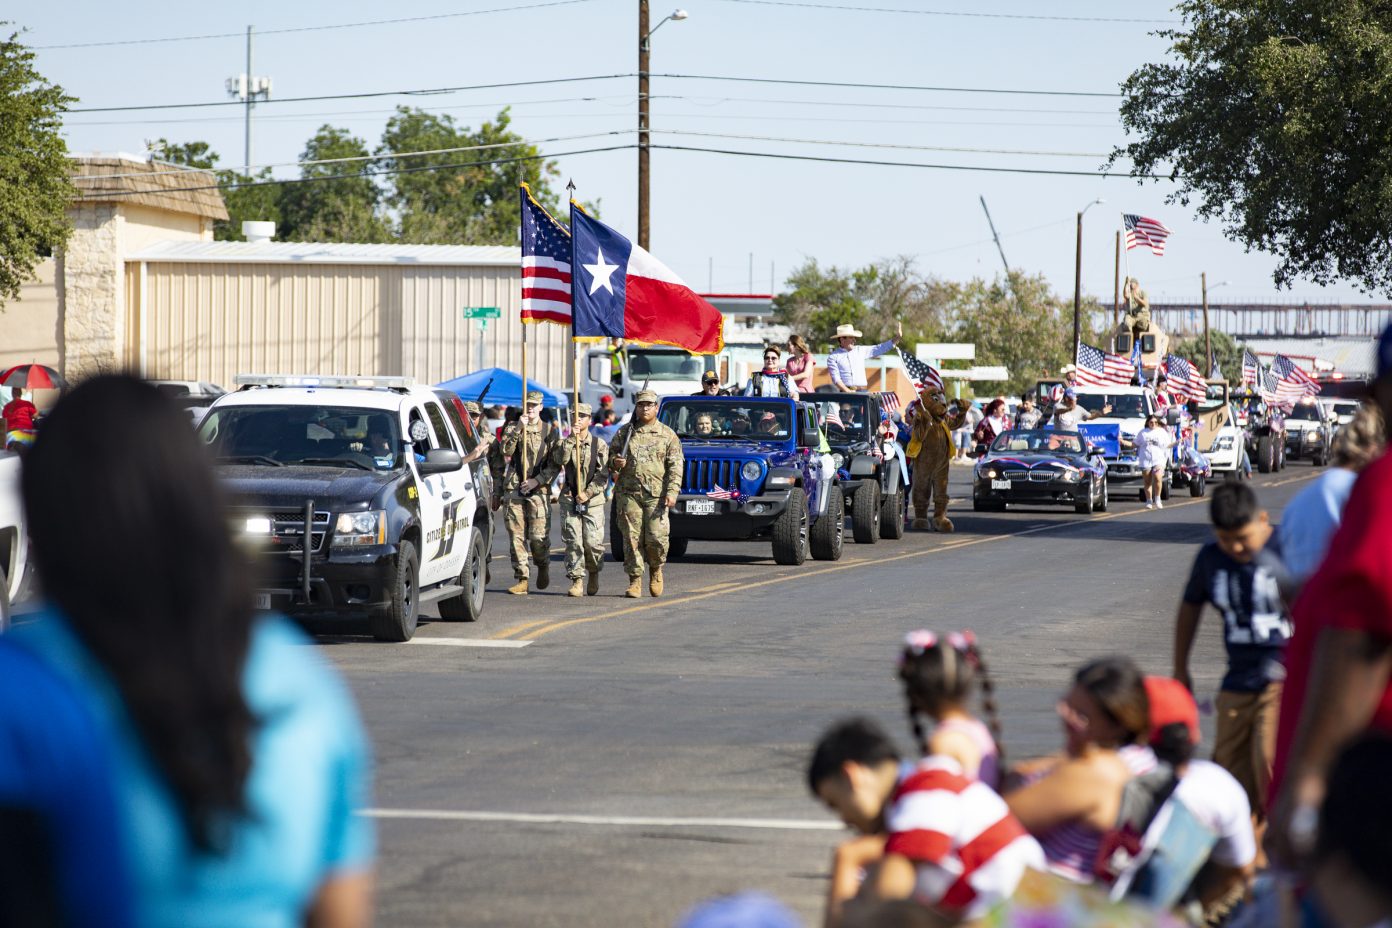 PHOTO GALLERY 2nd Annual Lions of Odessa Fourth of July Parade